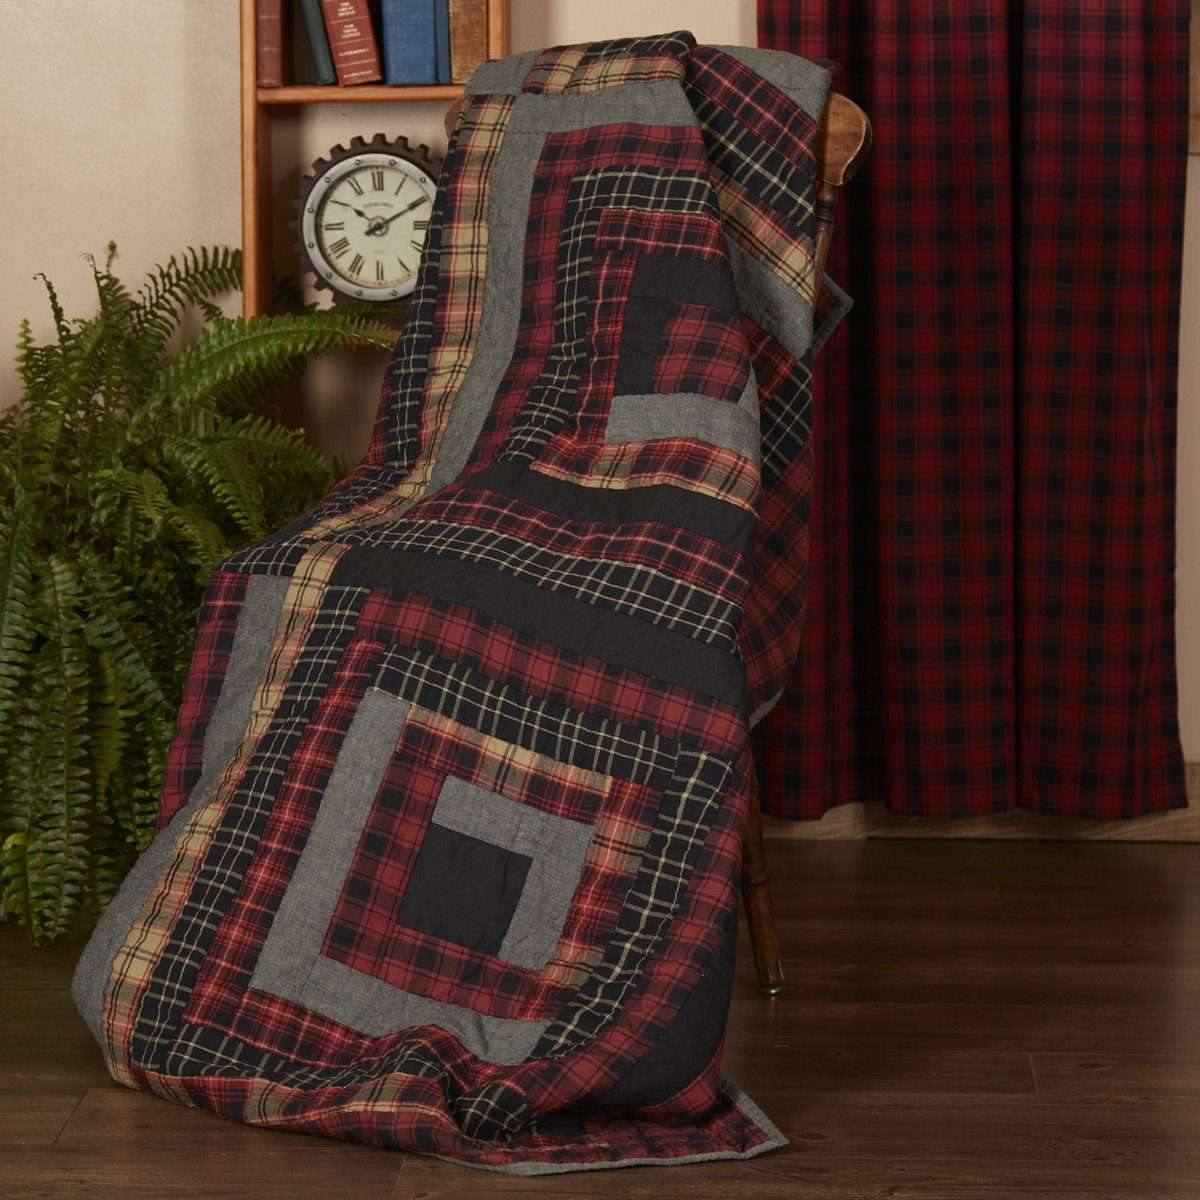 Cumberland Quilted Throw 70x55 VHC Brands